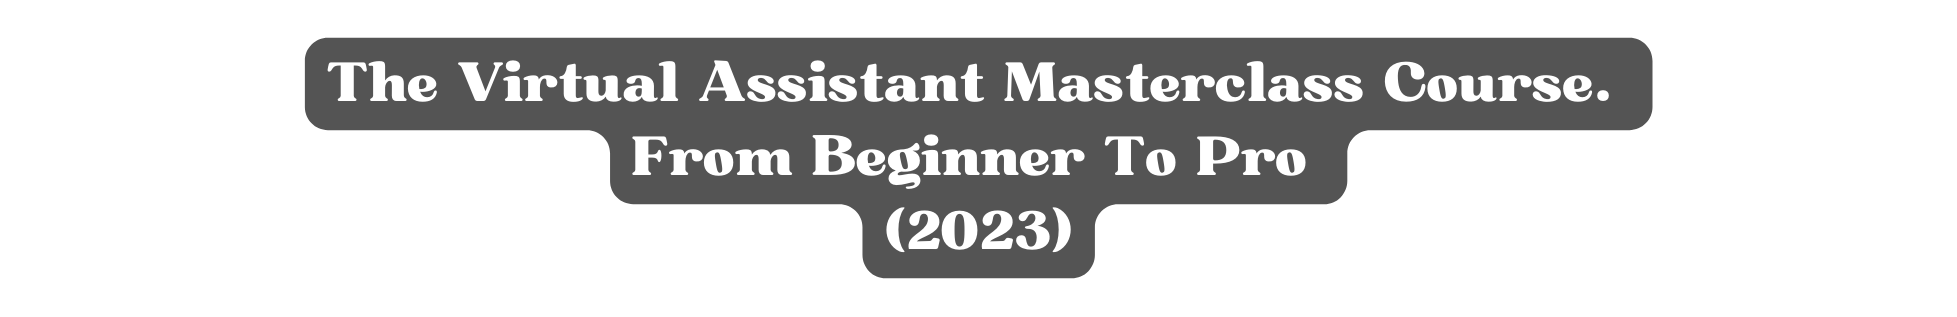 The Virtual Assistant Masterclass Course From Beginner To Pro 2023